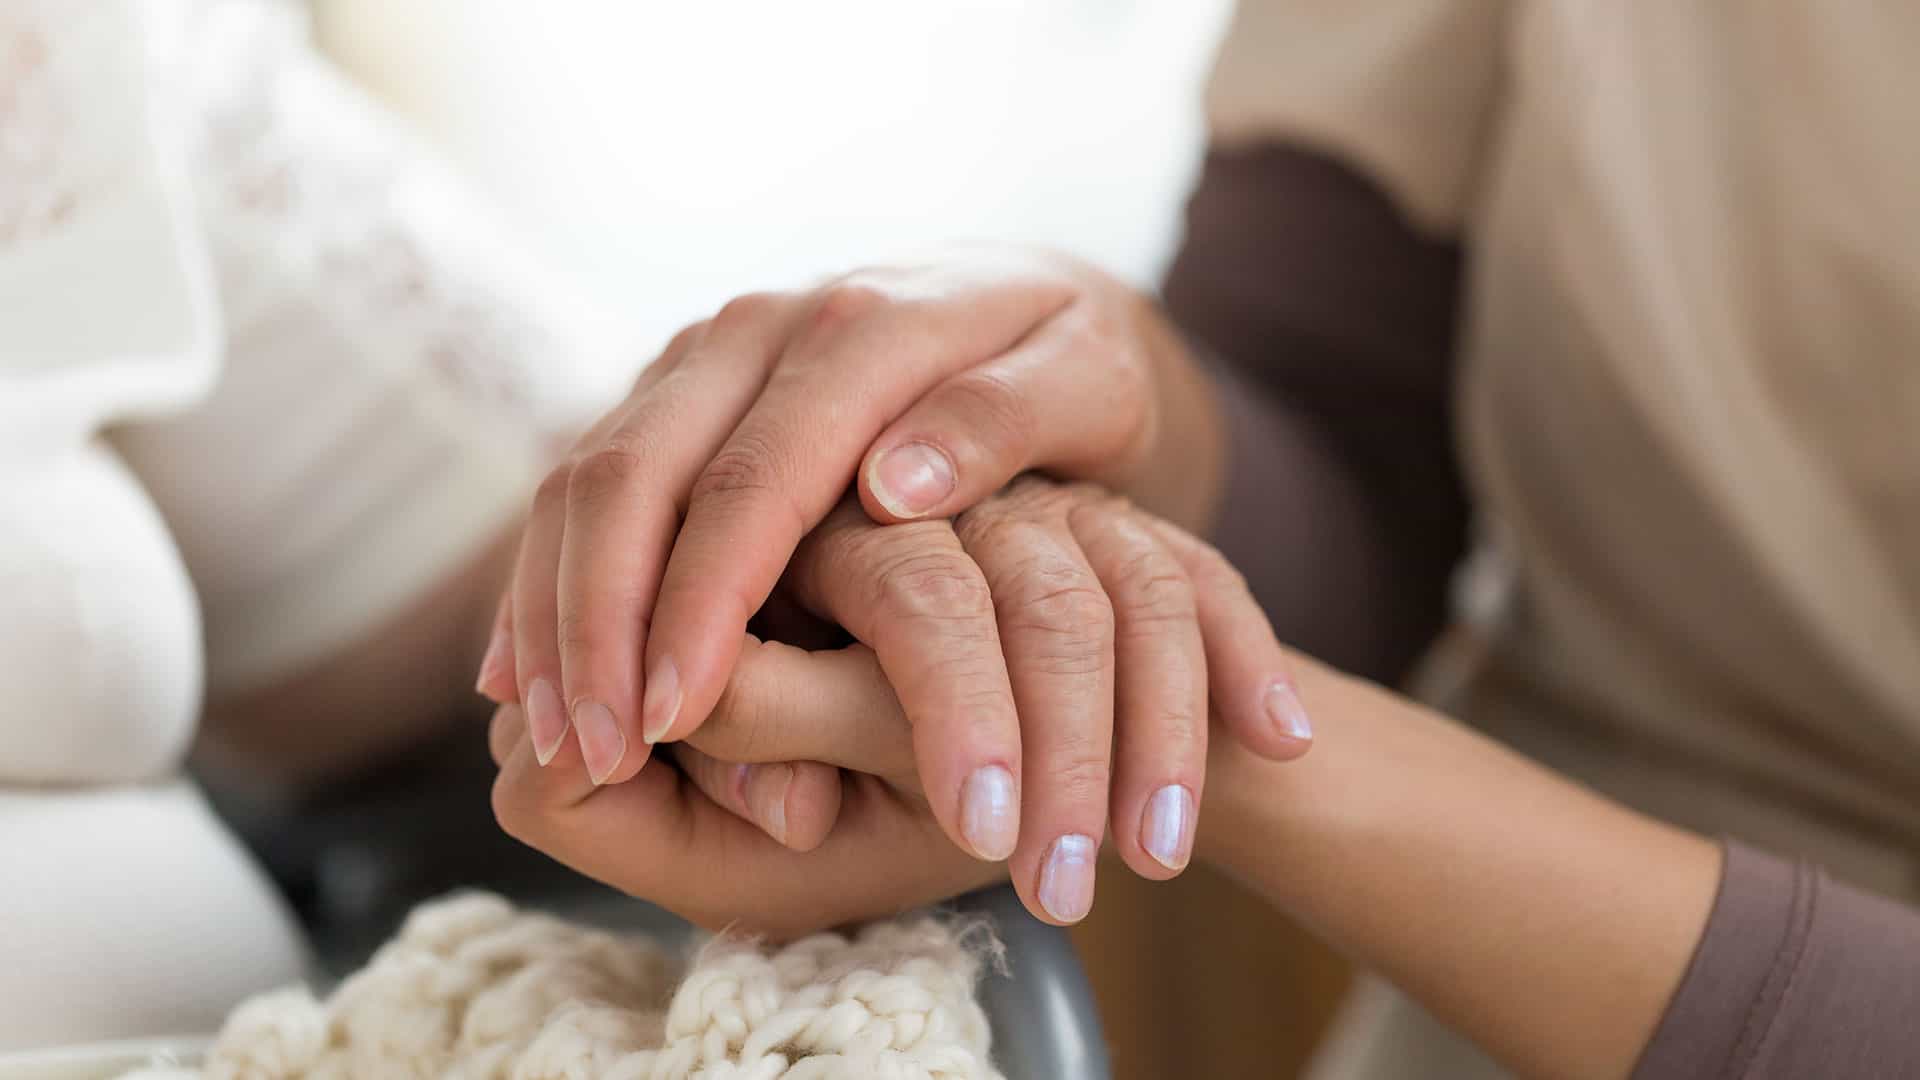 Close-up of interlocked hands of a PCW and an older adult